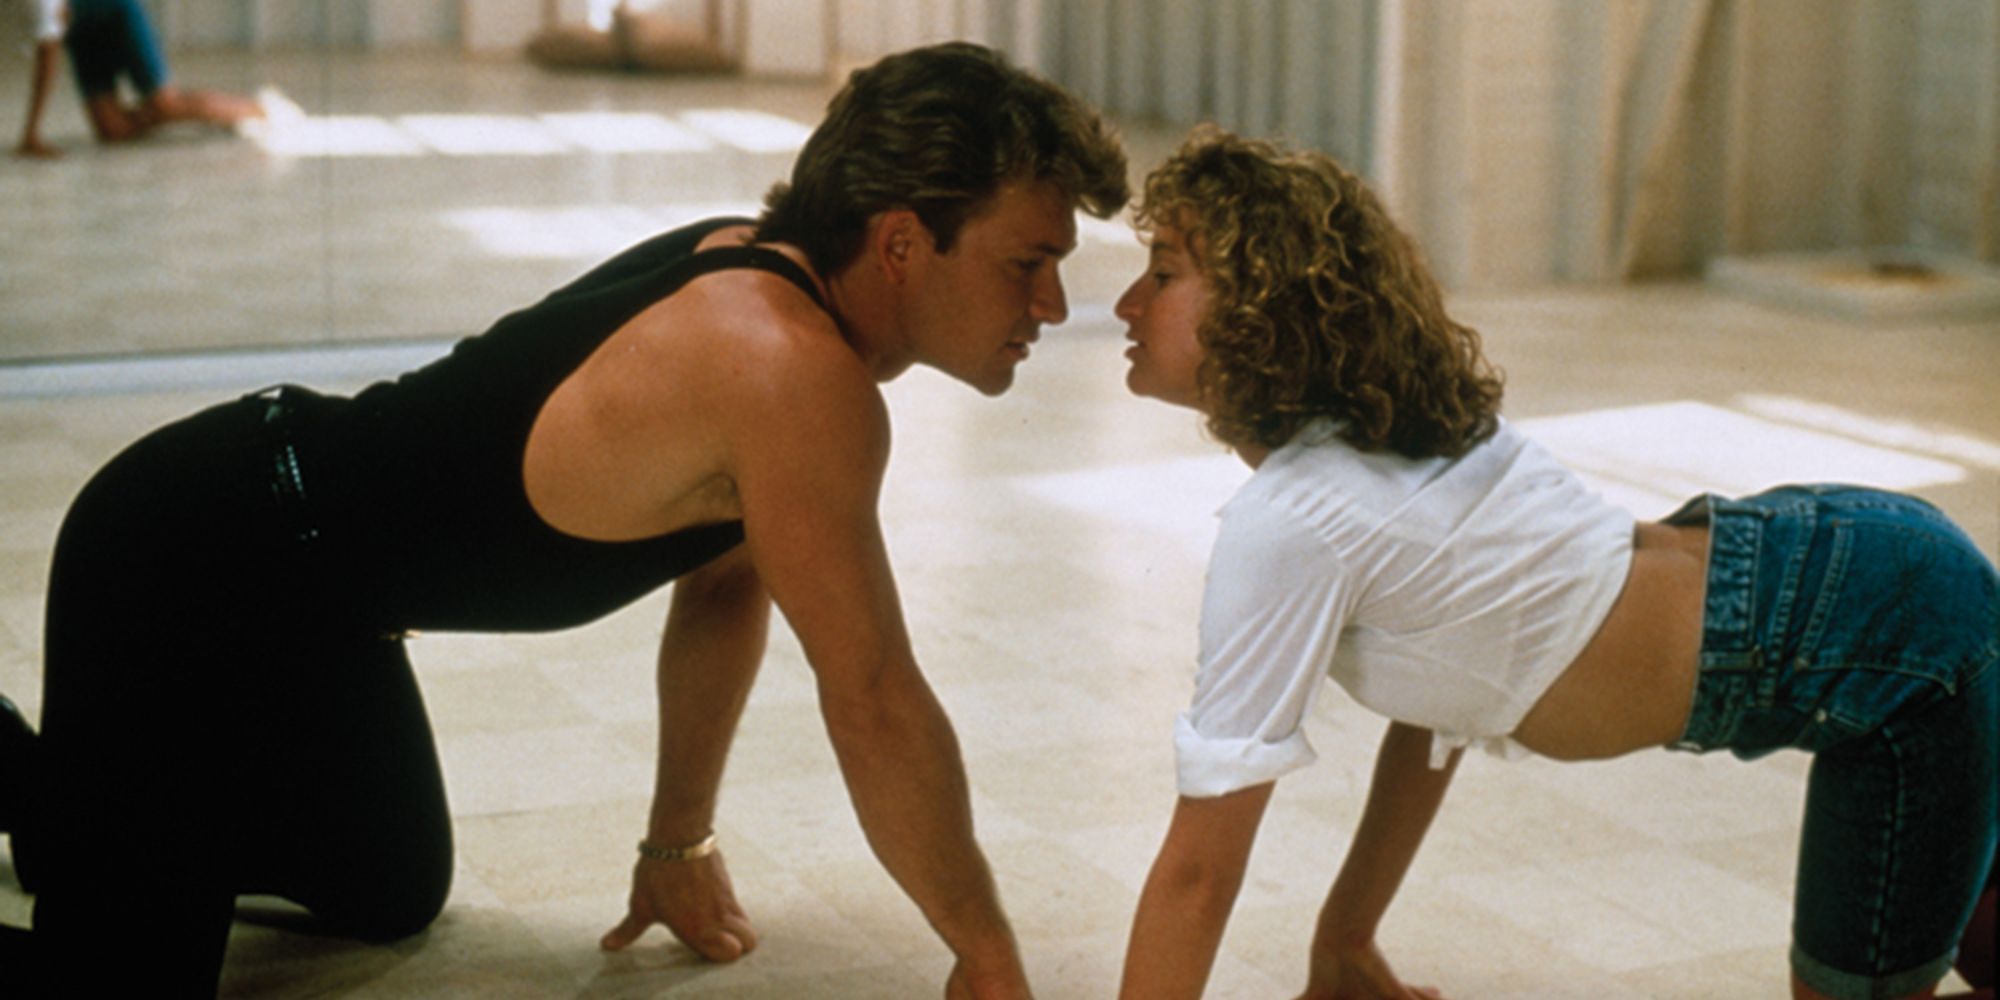 Patrick Swayze as Johnny Castle and Jennifer Grey as Baby Houseman in a scene from Dirty Dancing.